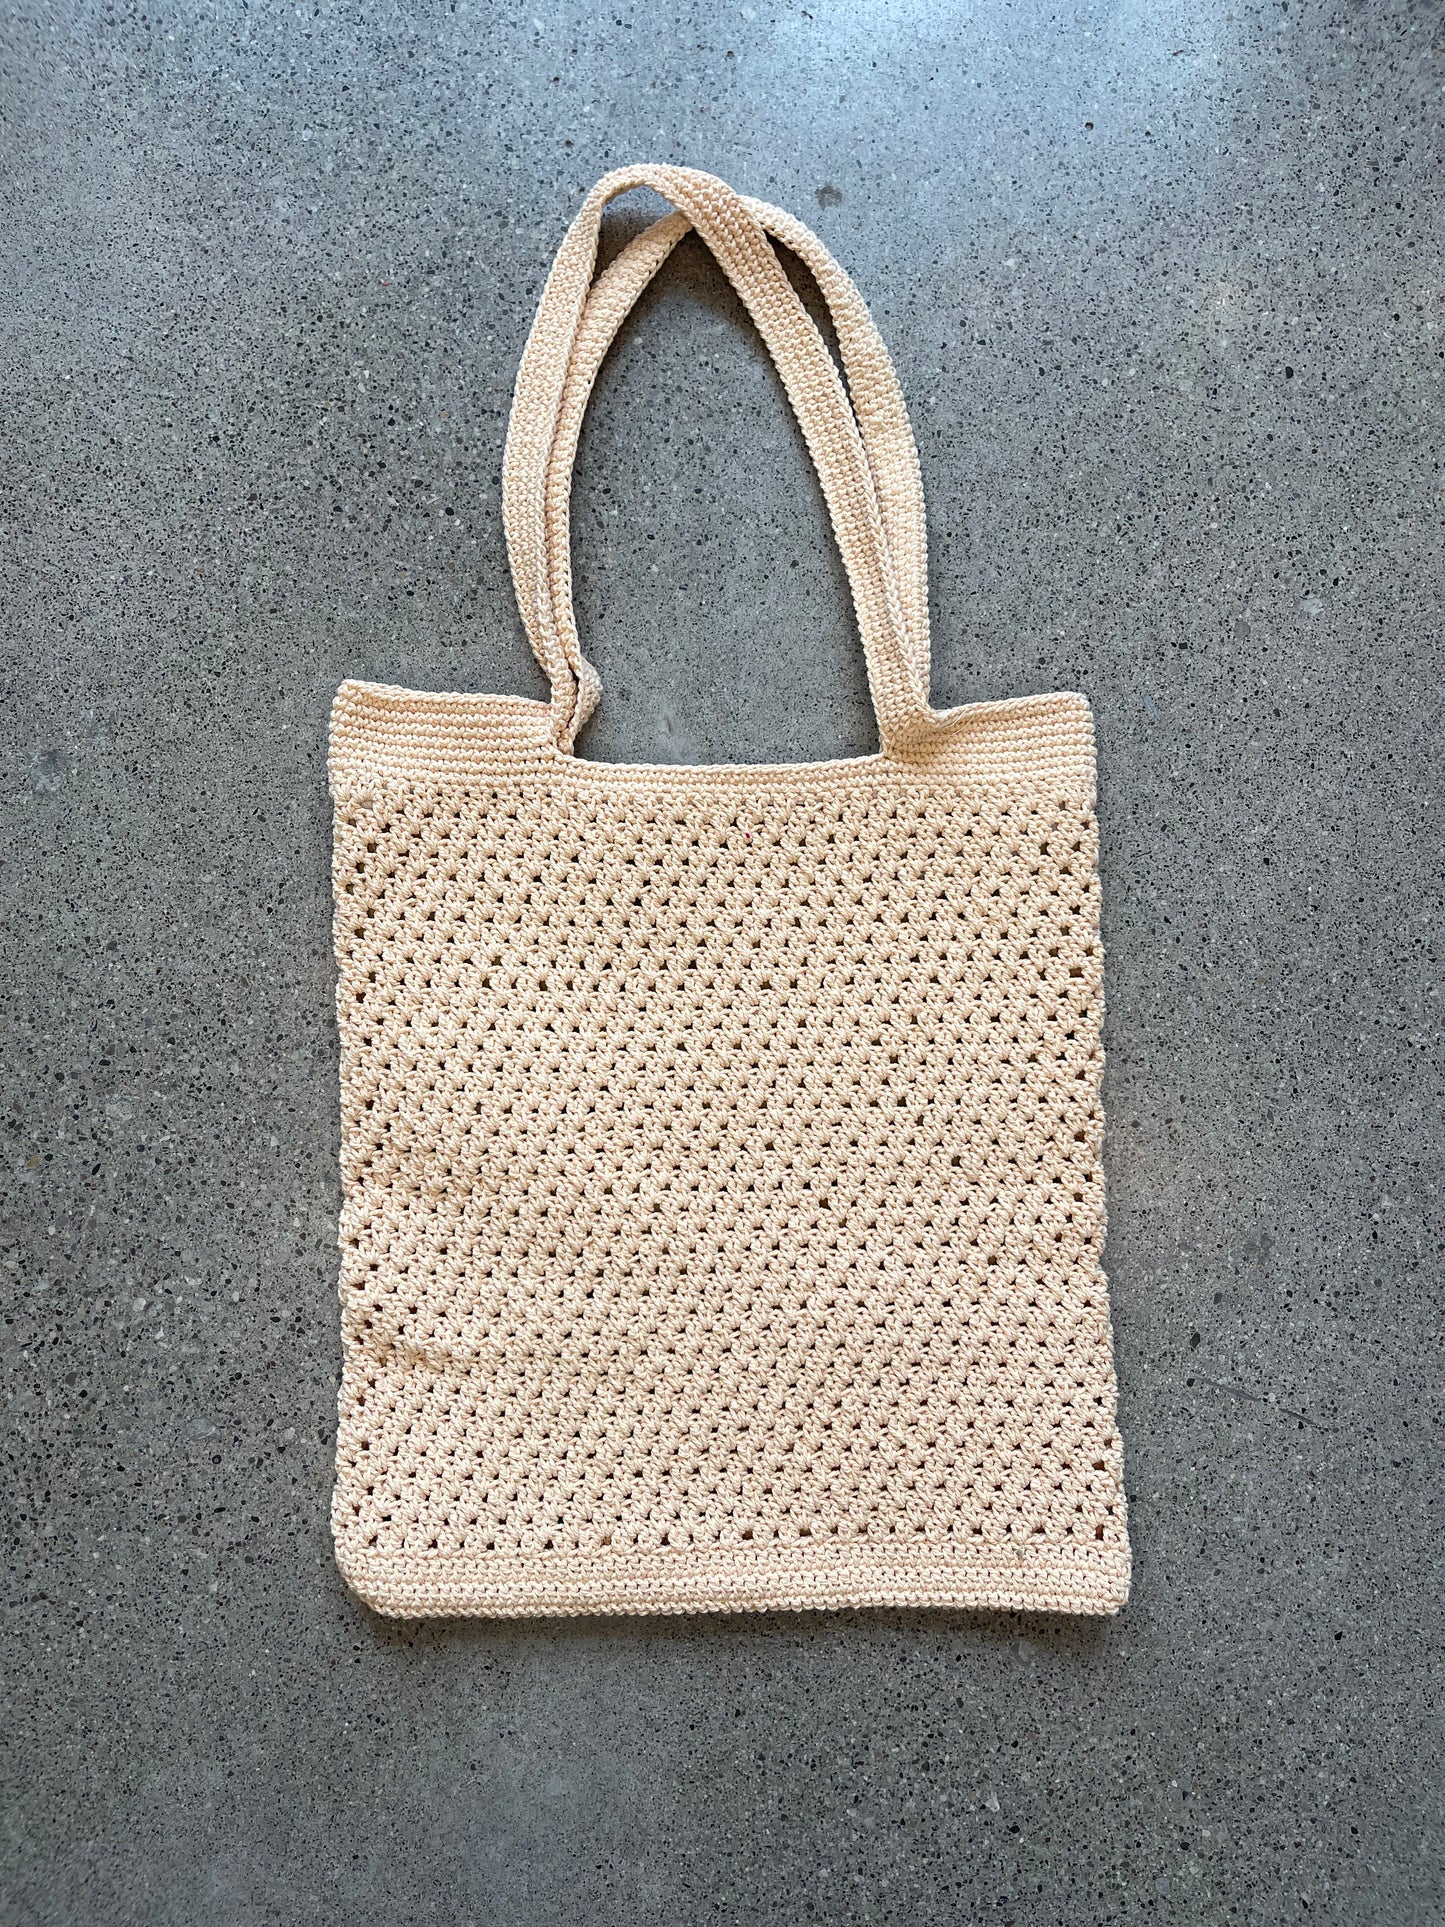 Cream Hand Knitted Tote